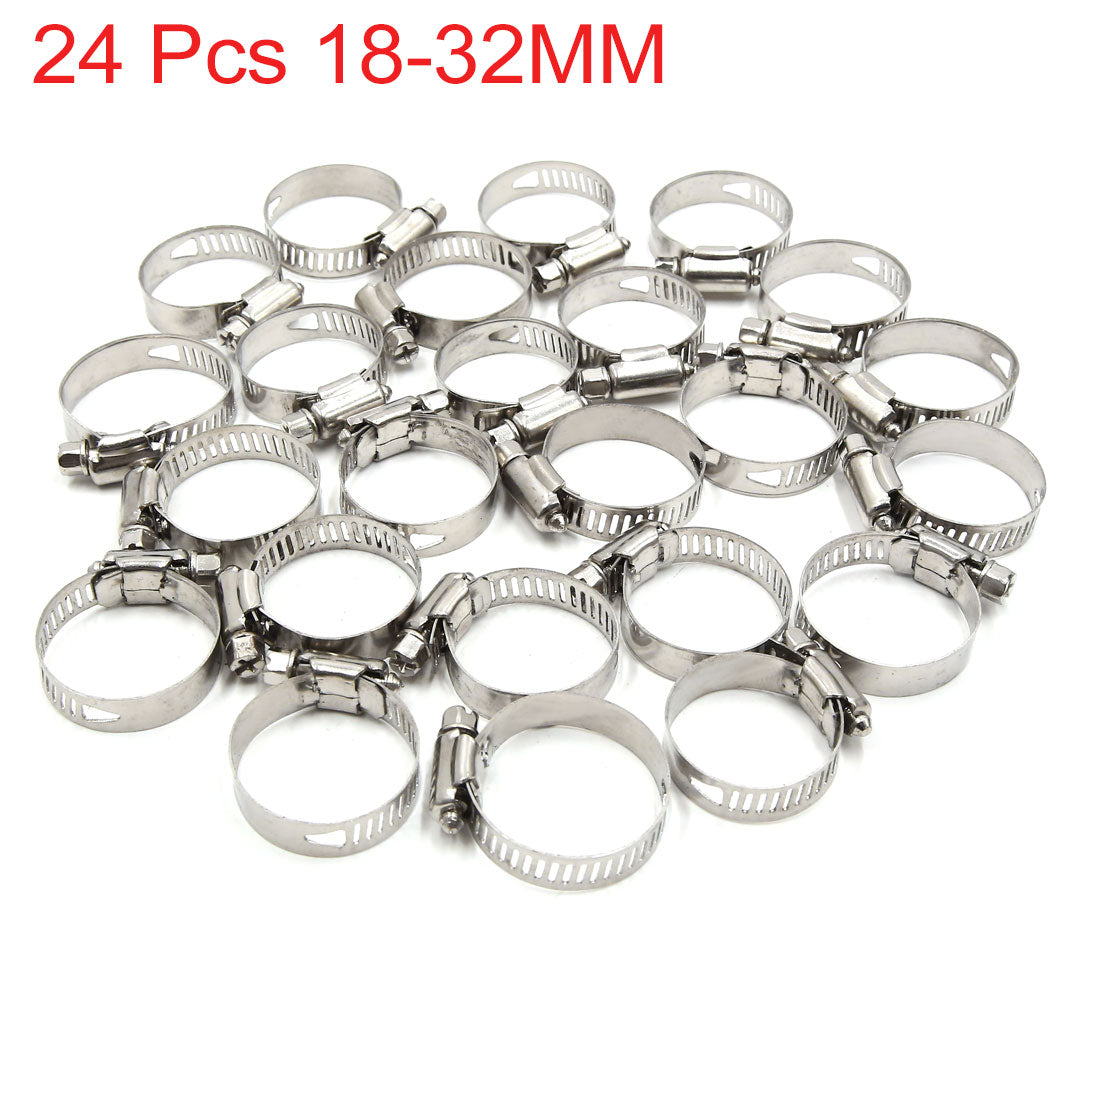 uxcell Uxcell 24pcs 18-32MM Stainless Steel Car Vehicle Drive Hose Clamp Fuel Line  Clip